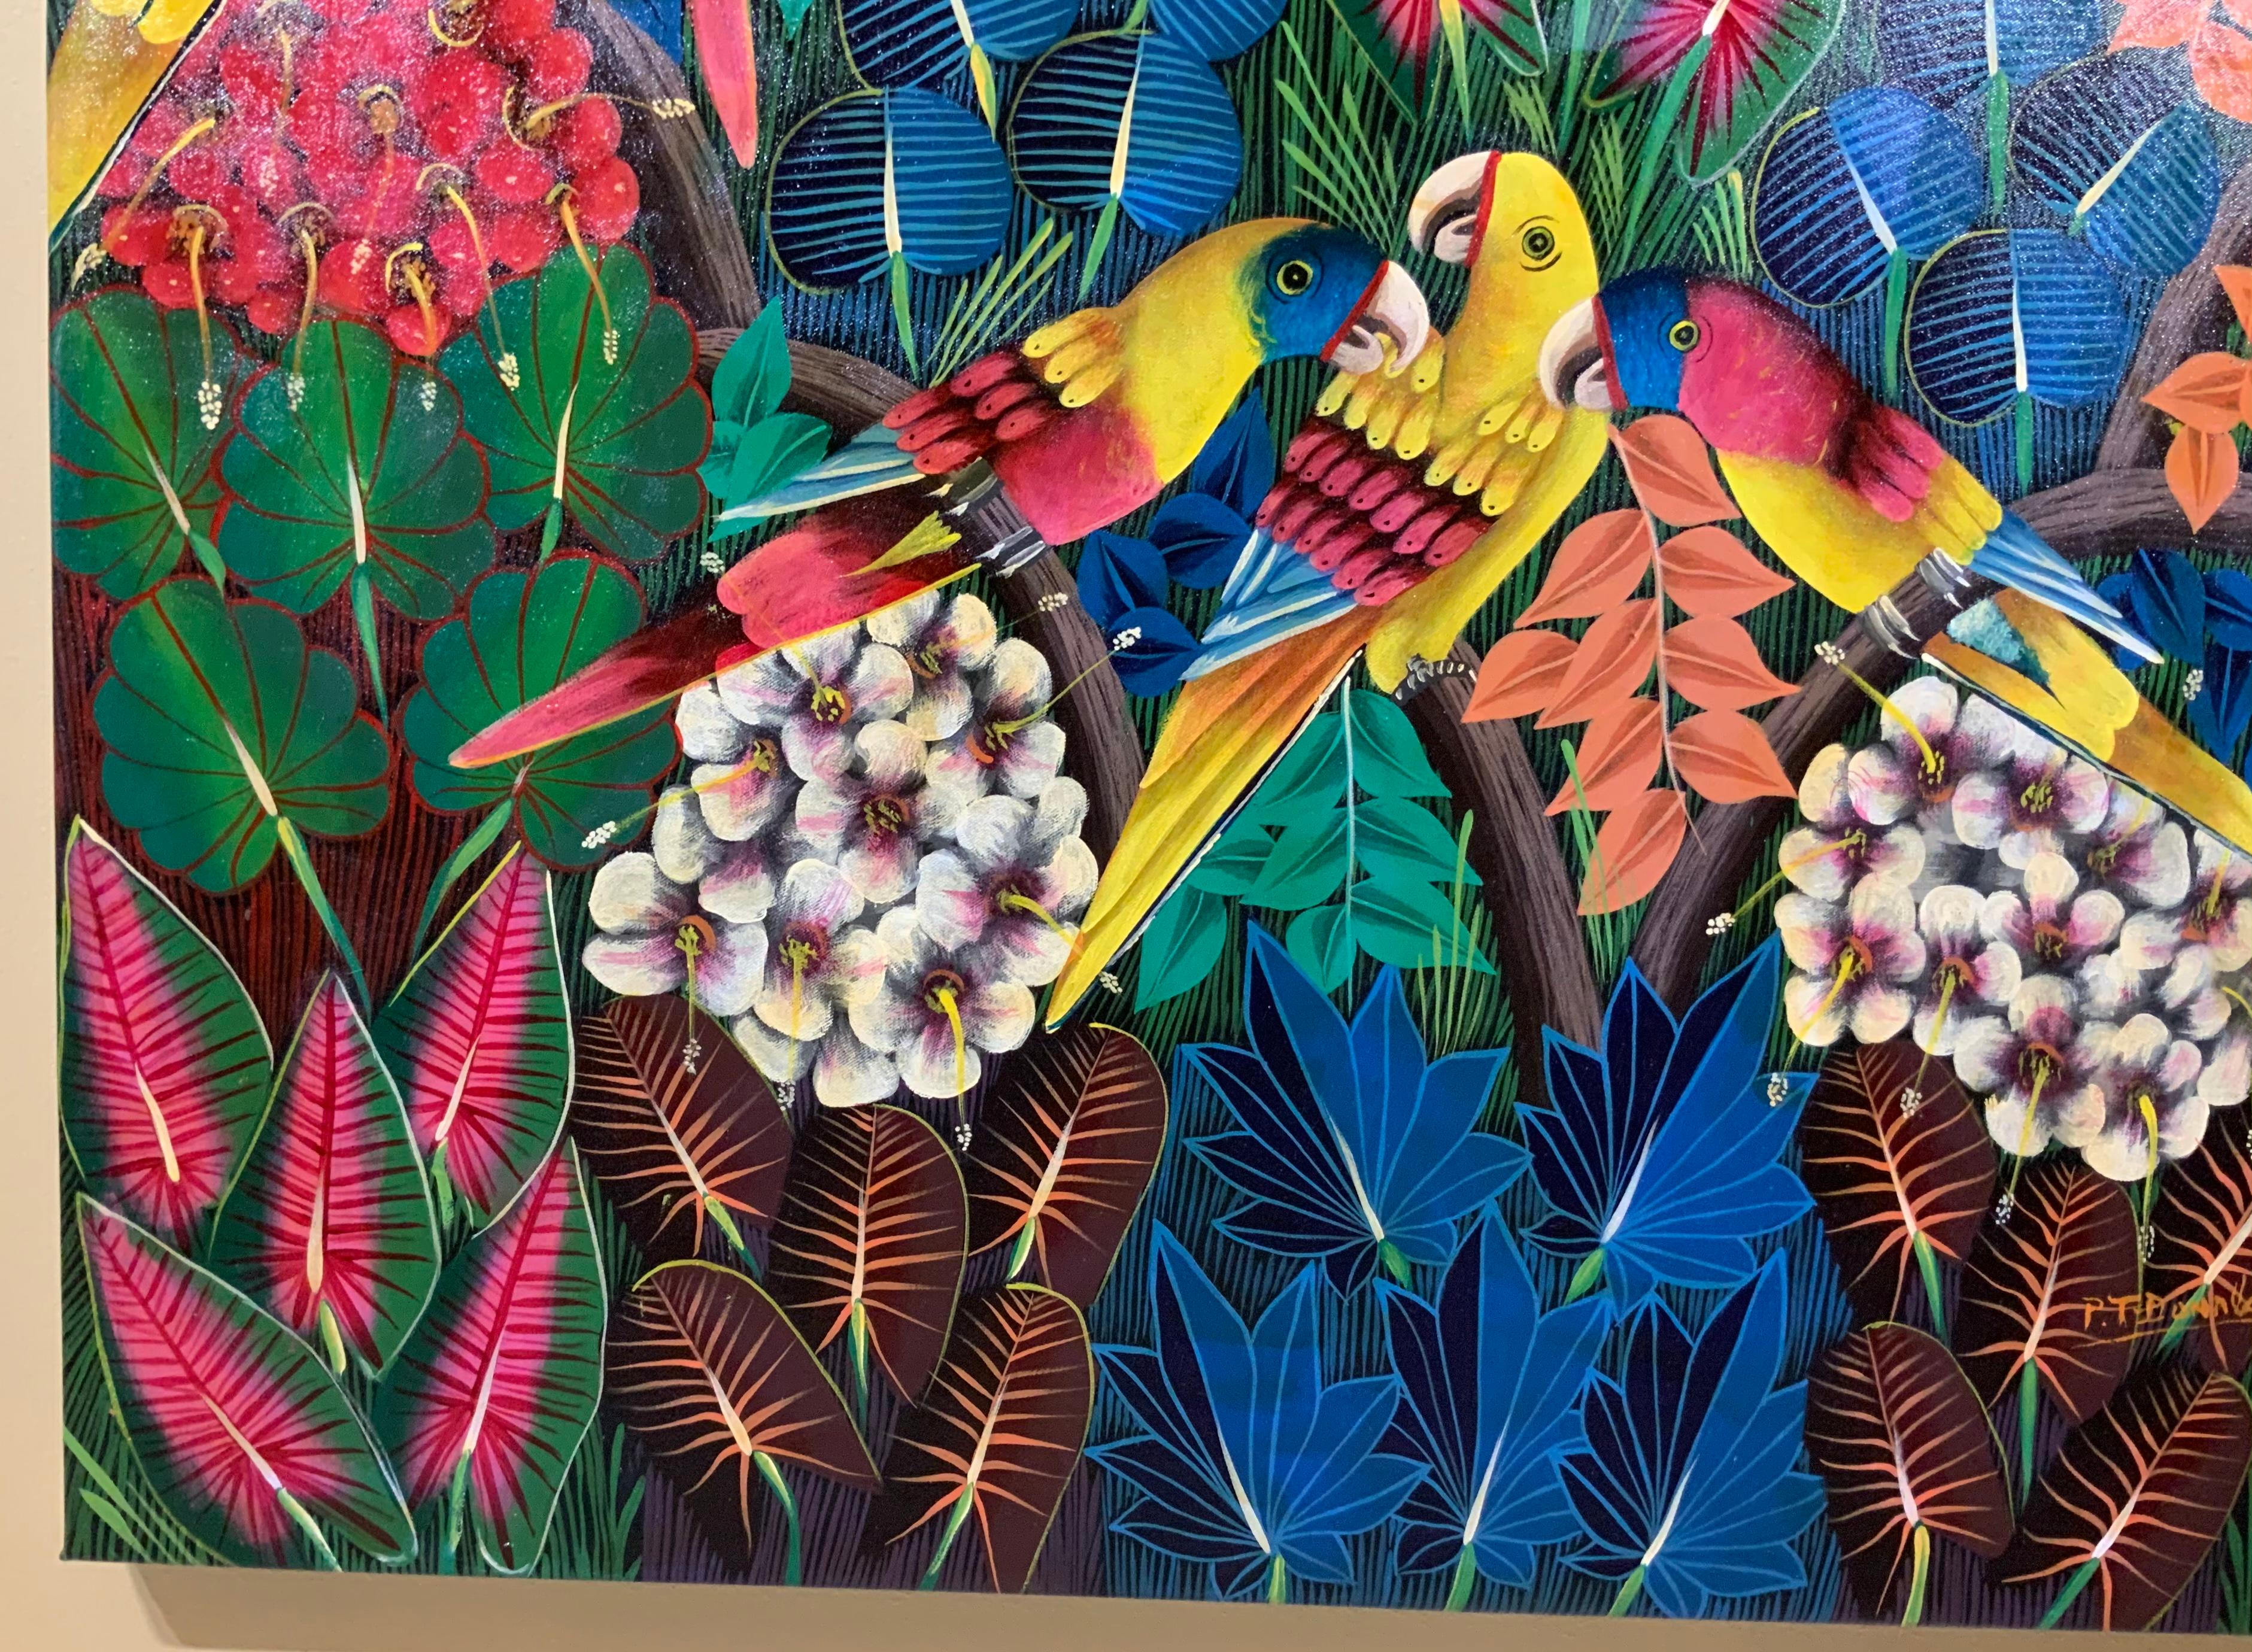 Large Parrots in the Jungle, Haitian Acrylic Painting on Canvas 3